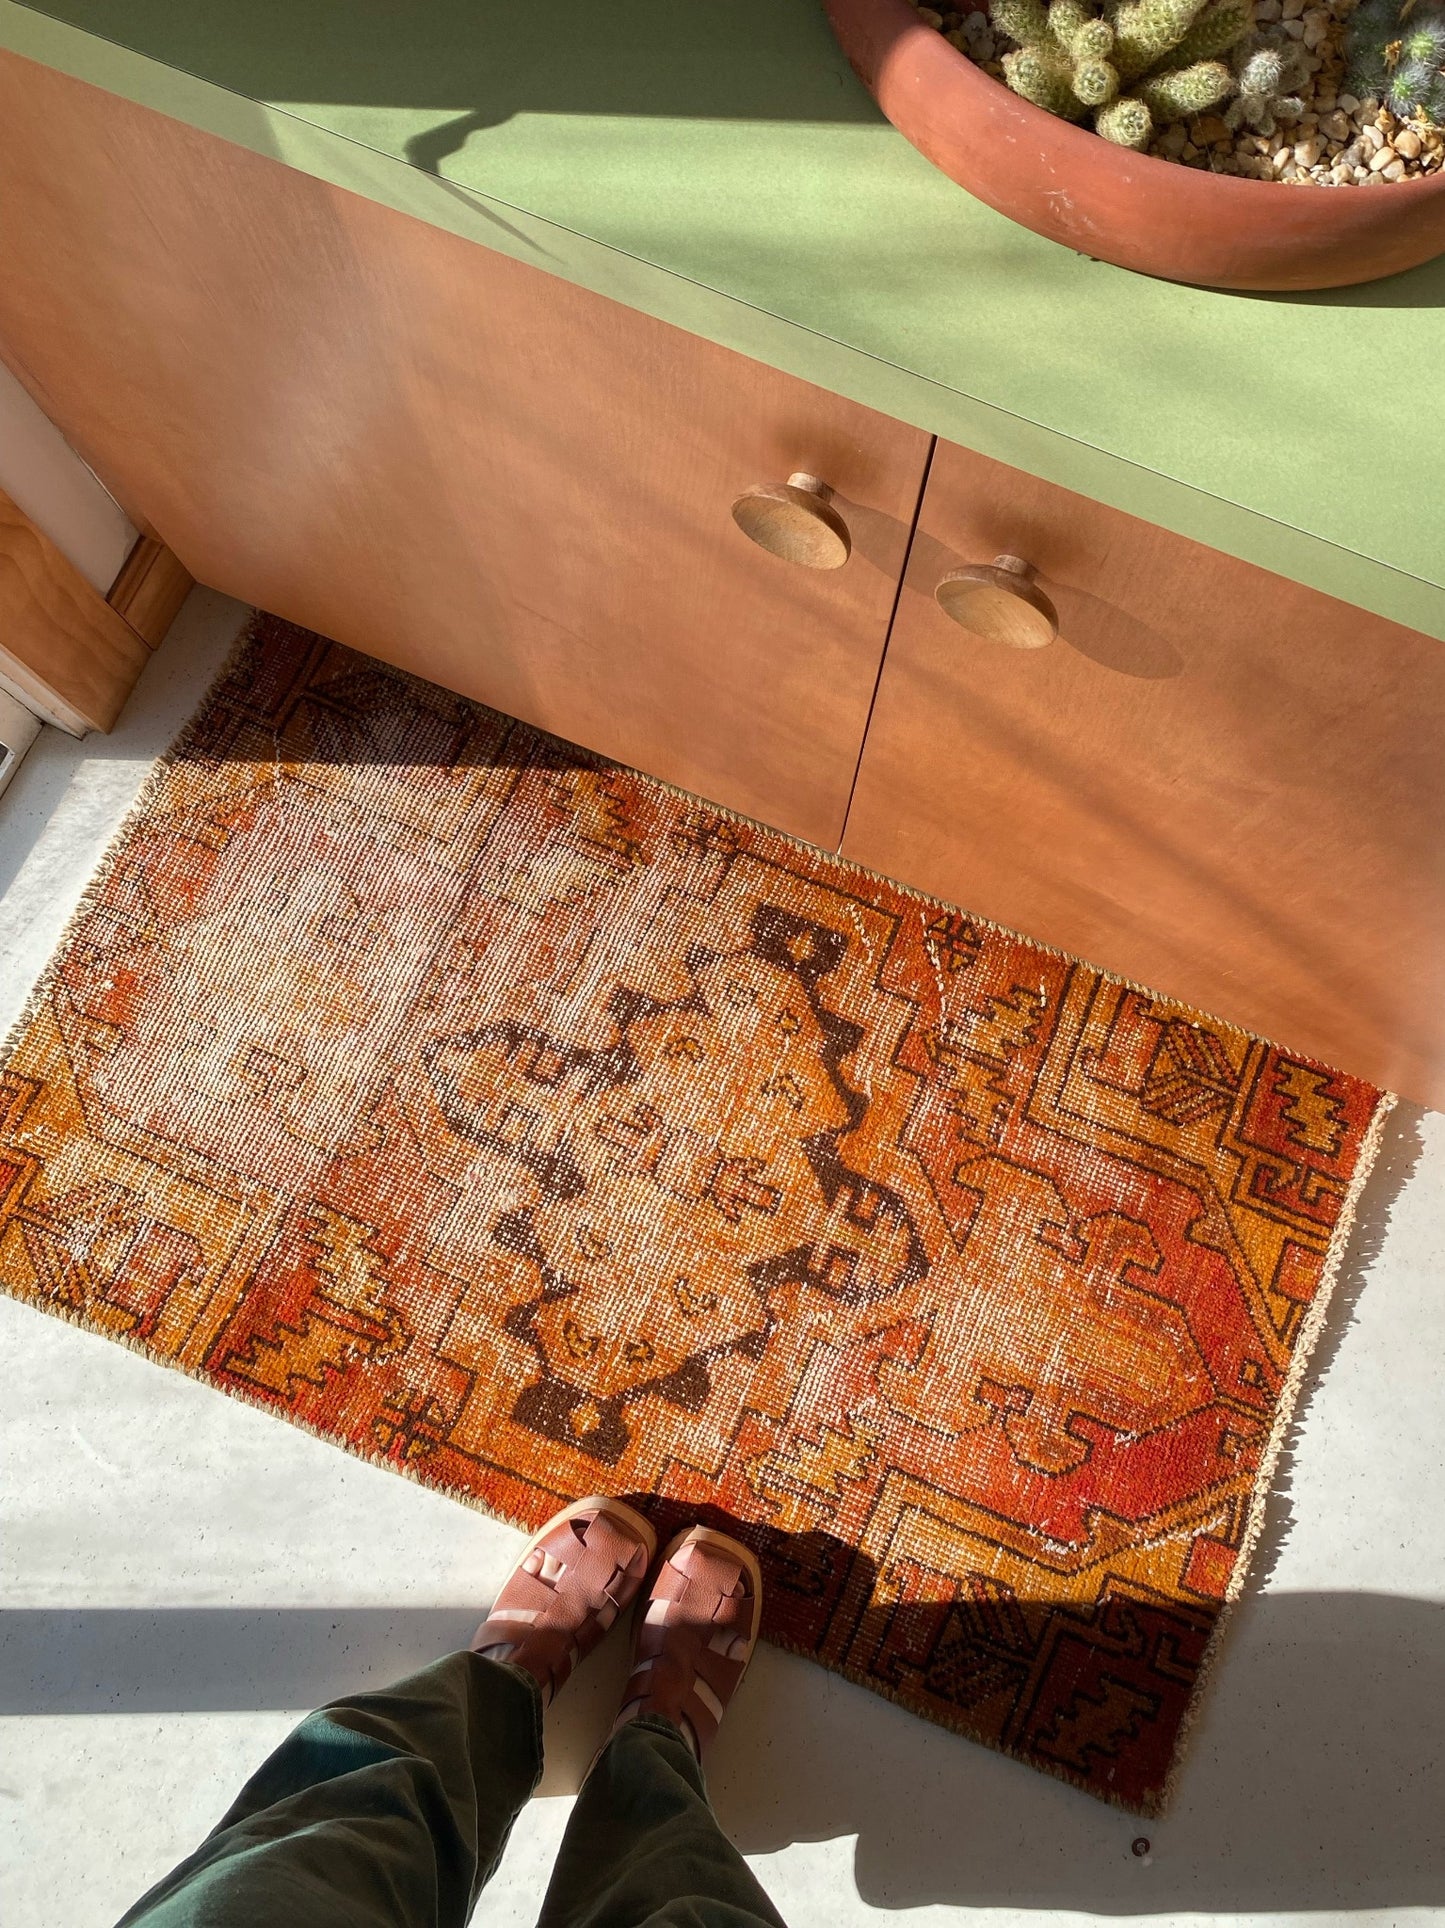 See Russel Persian Mini Rug in the Sunlight